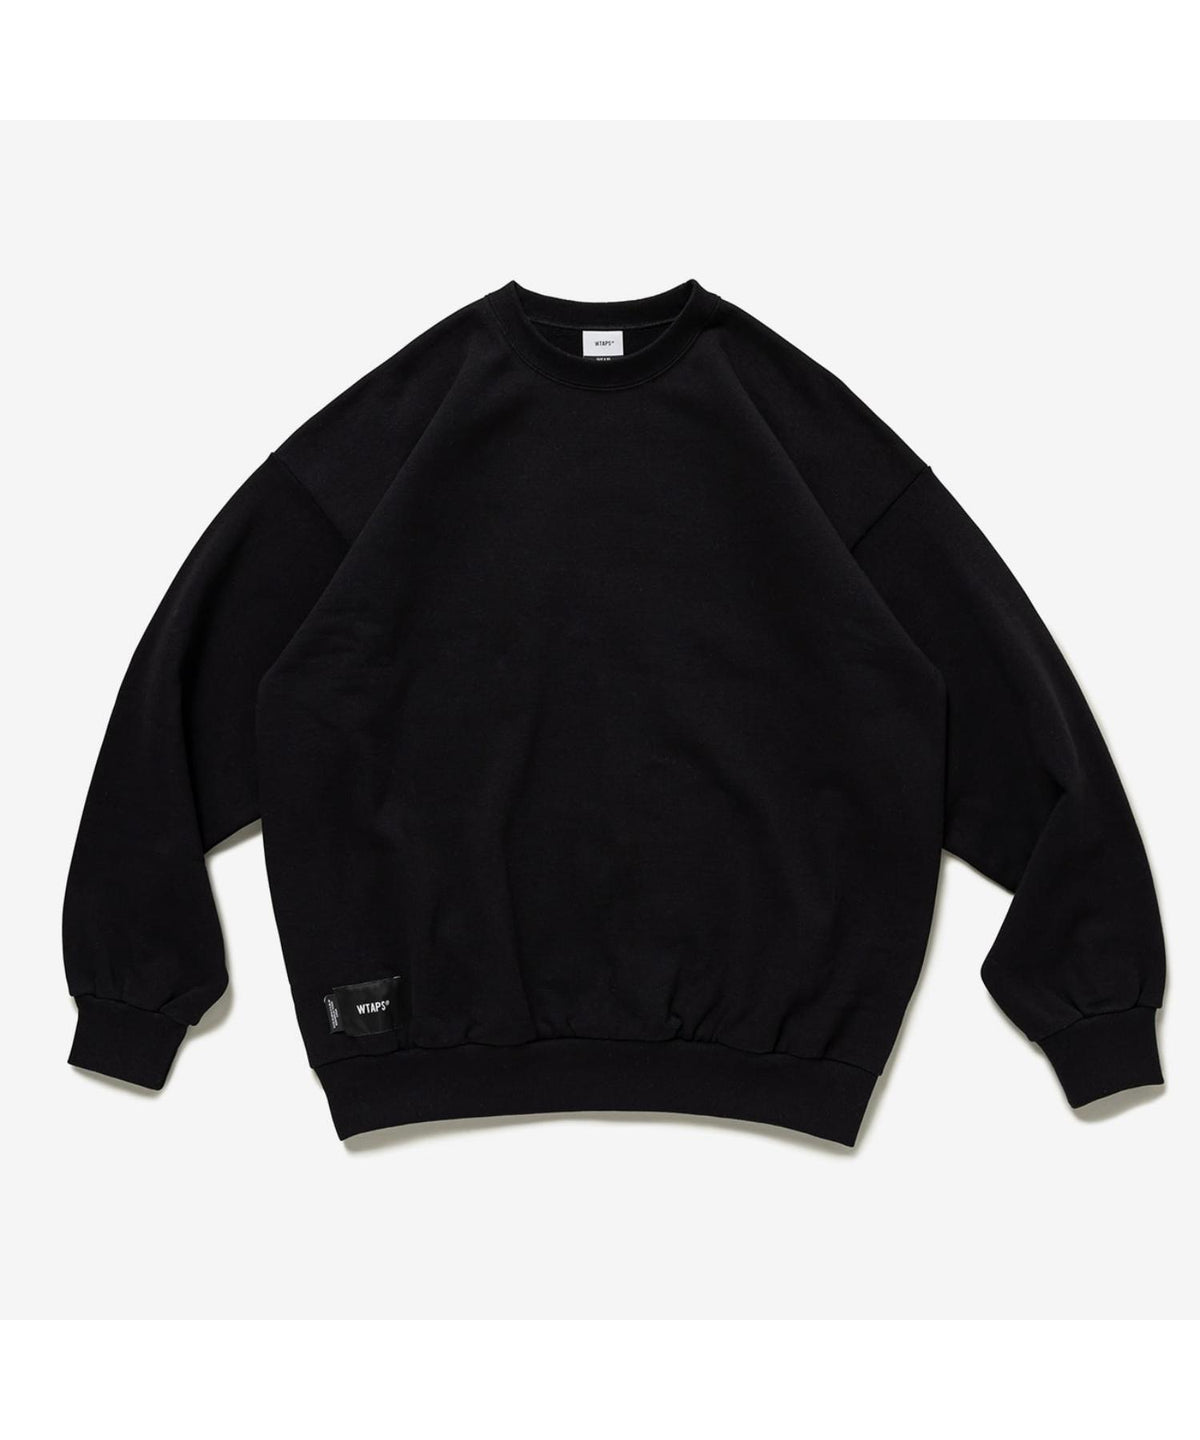 FORTLESS / SWEATER / COTTON